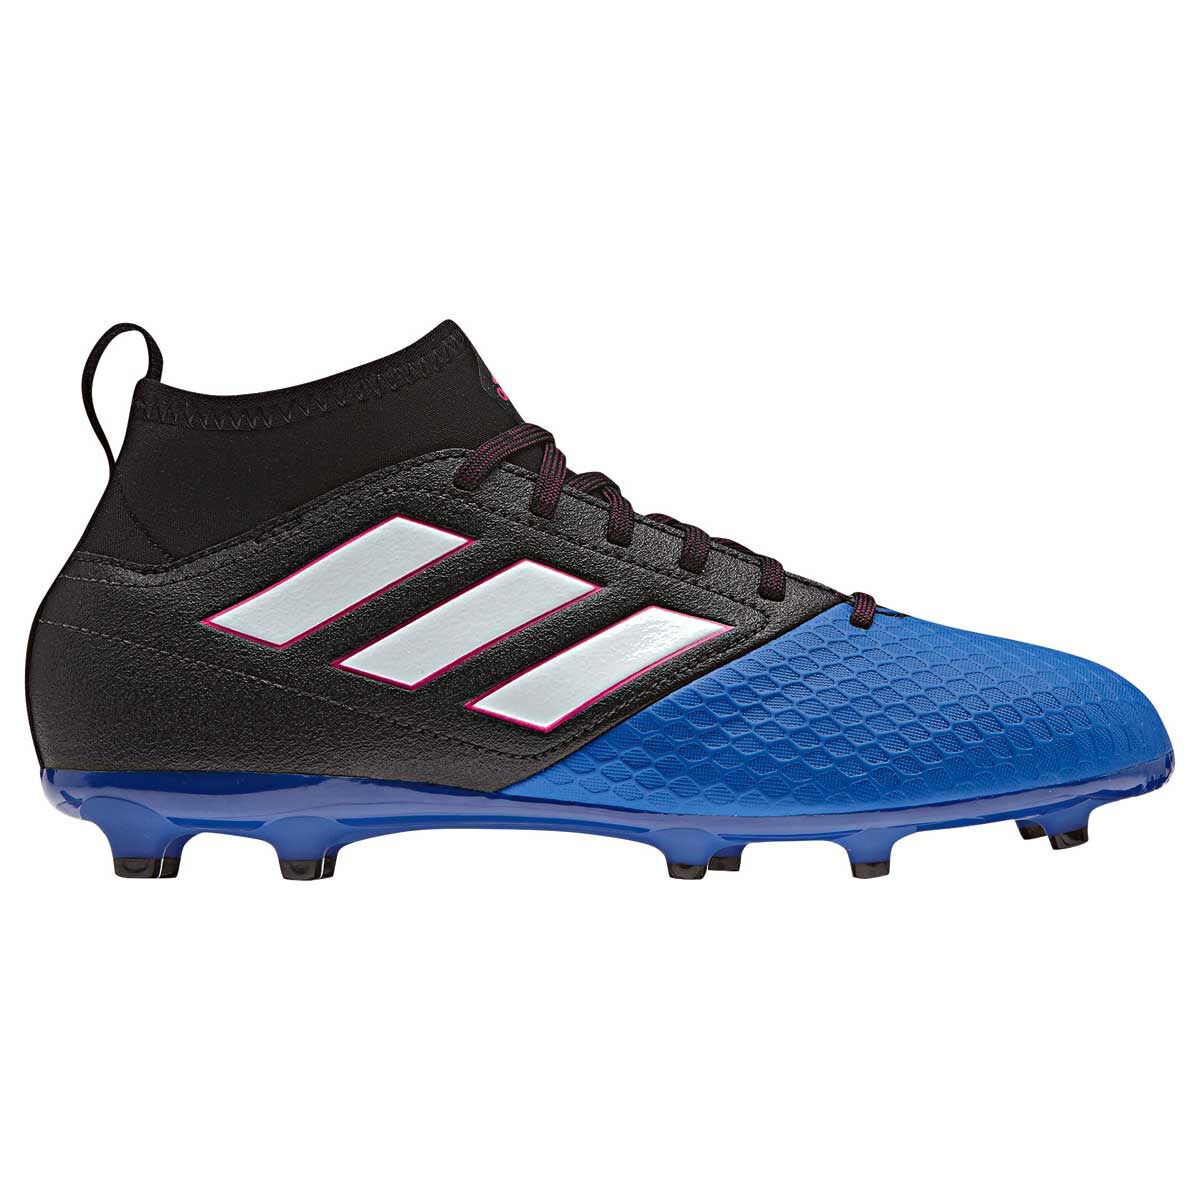 adidas ace 17.3 who wears them